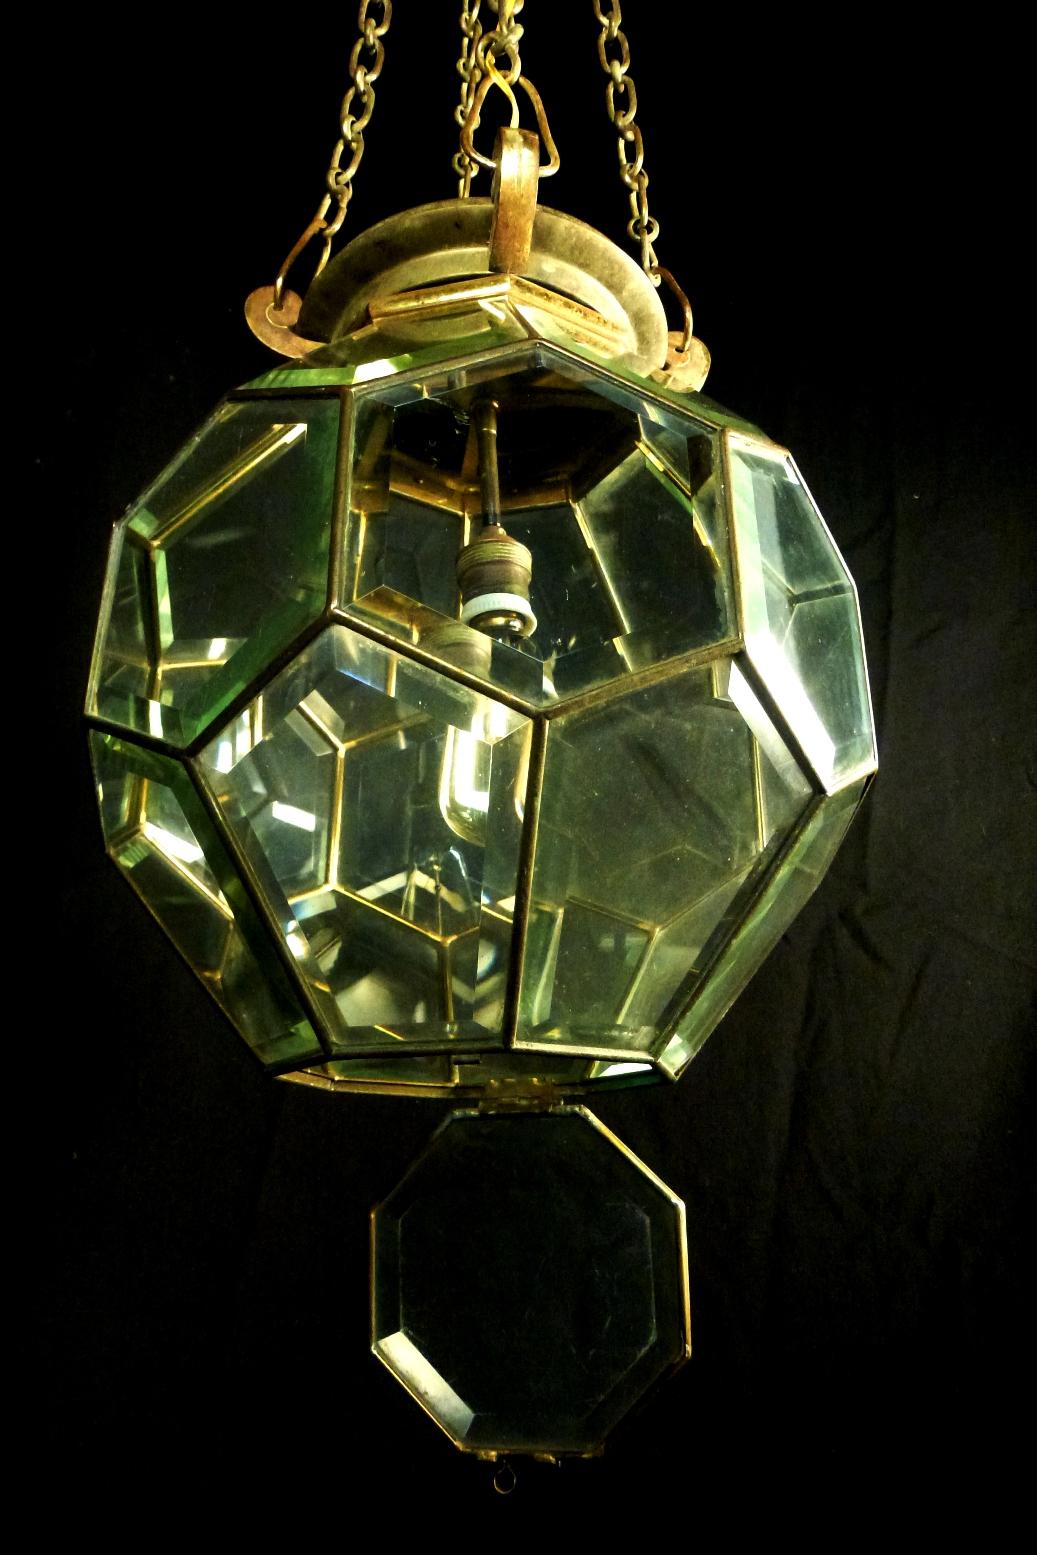 Pentagon Beveled Glass Geometric Ceiling Light in Adolf Loos Style, Early 1900s For Sale 5